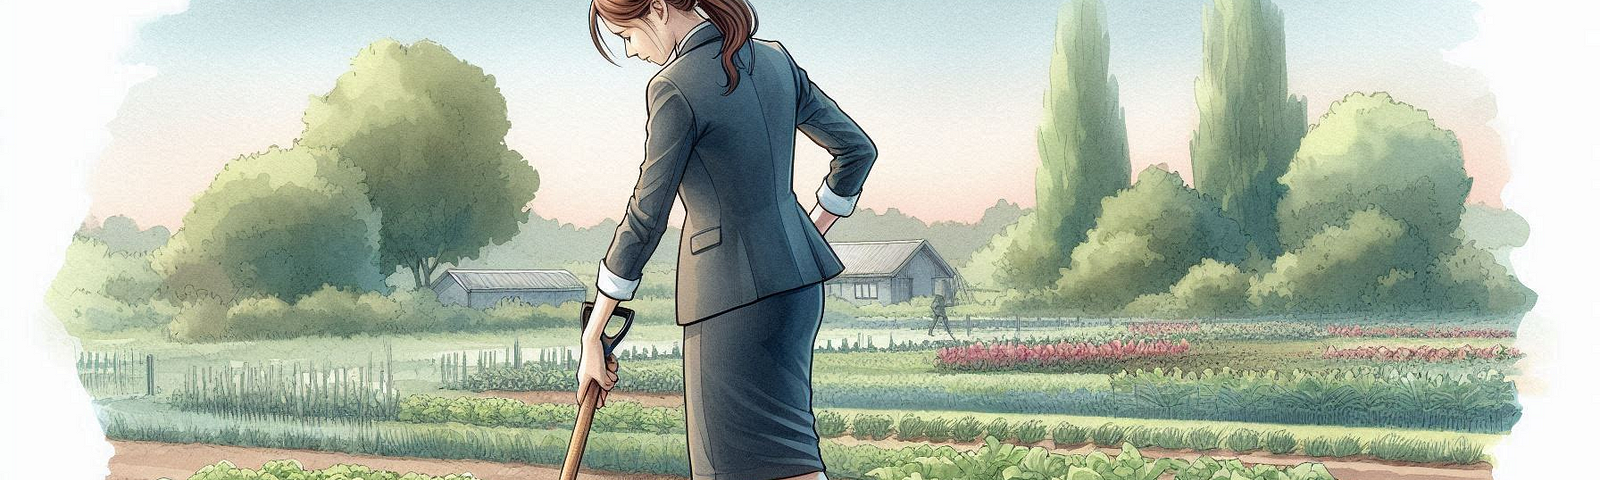 an image of a woman in a professional suit tending to her garden